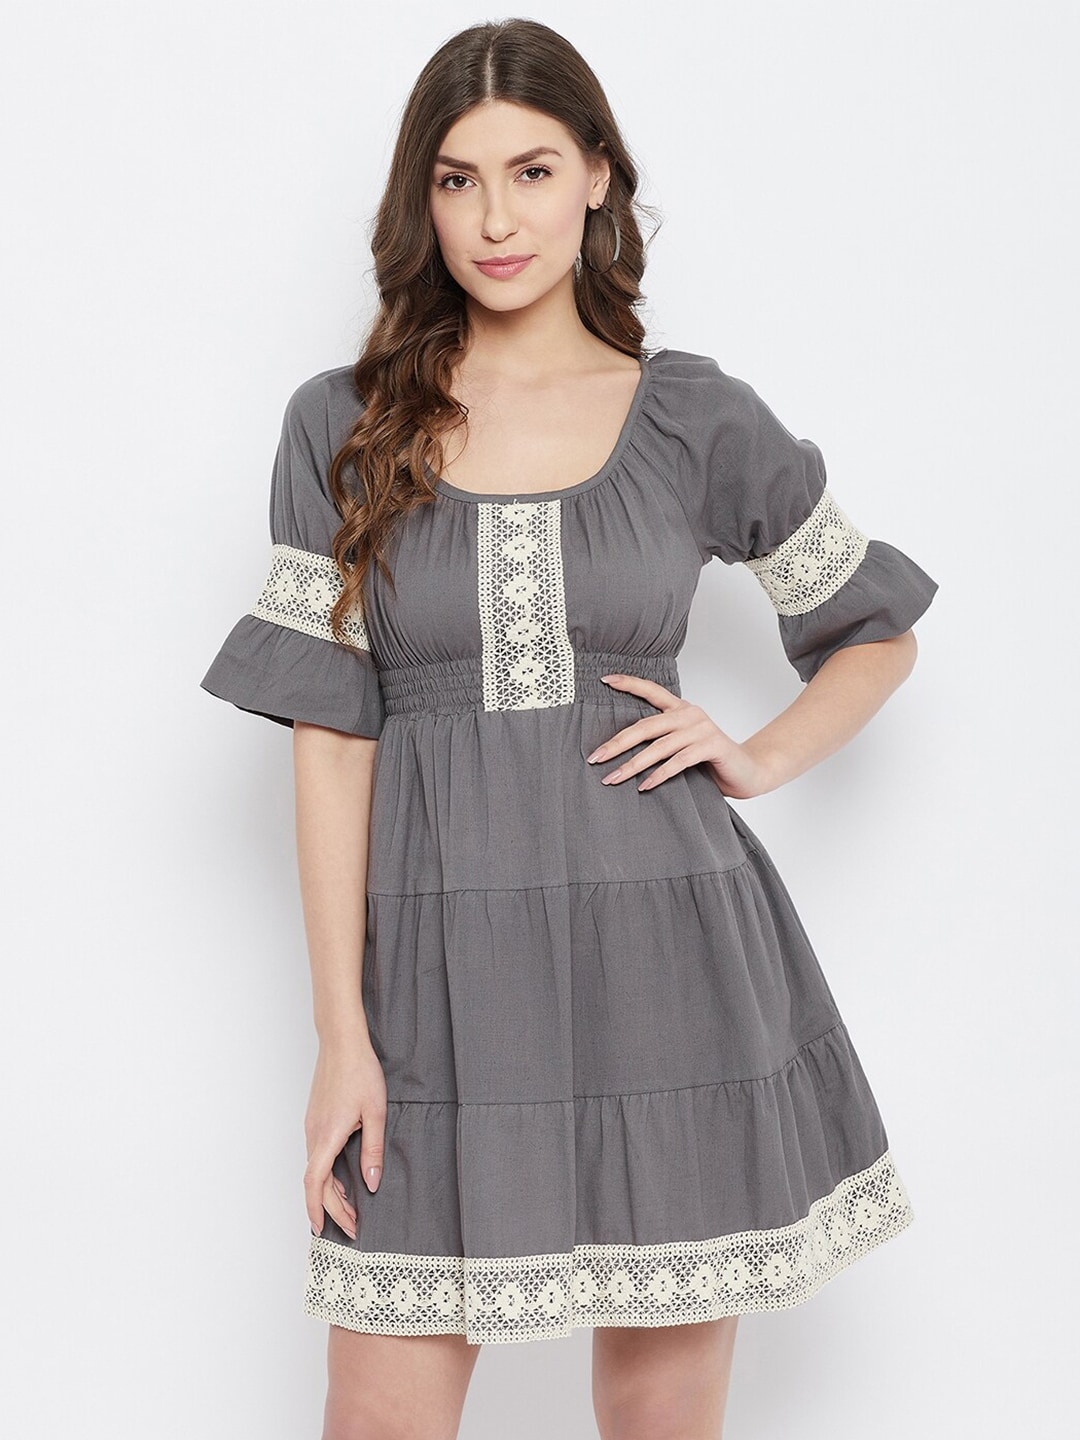 JHANKHI Grey Round Neck Lace Inserts Fit and Flare Dress Price in India